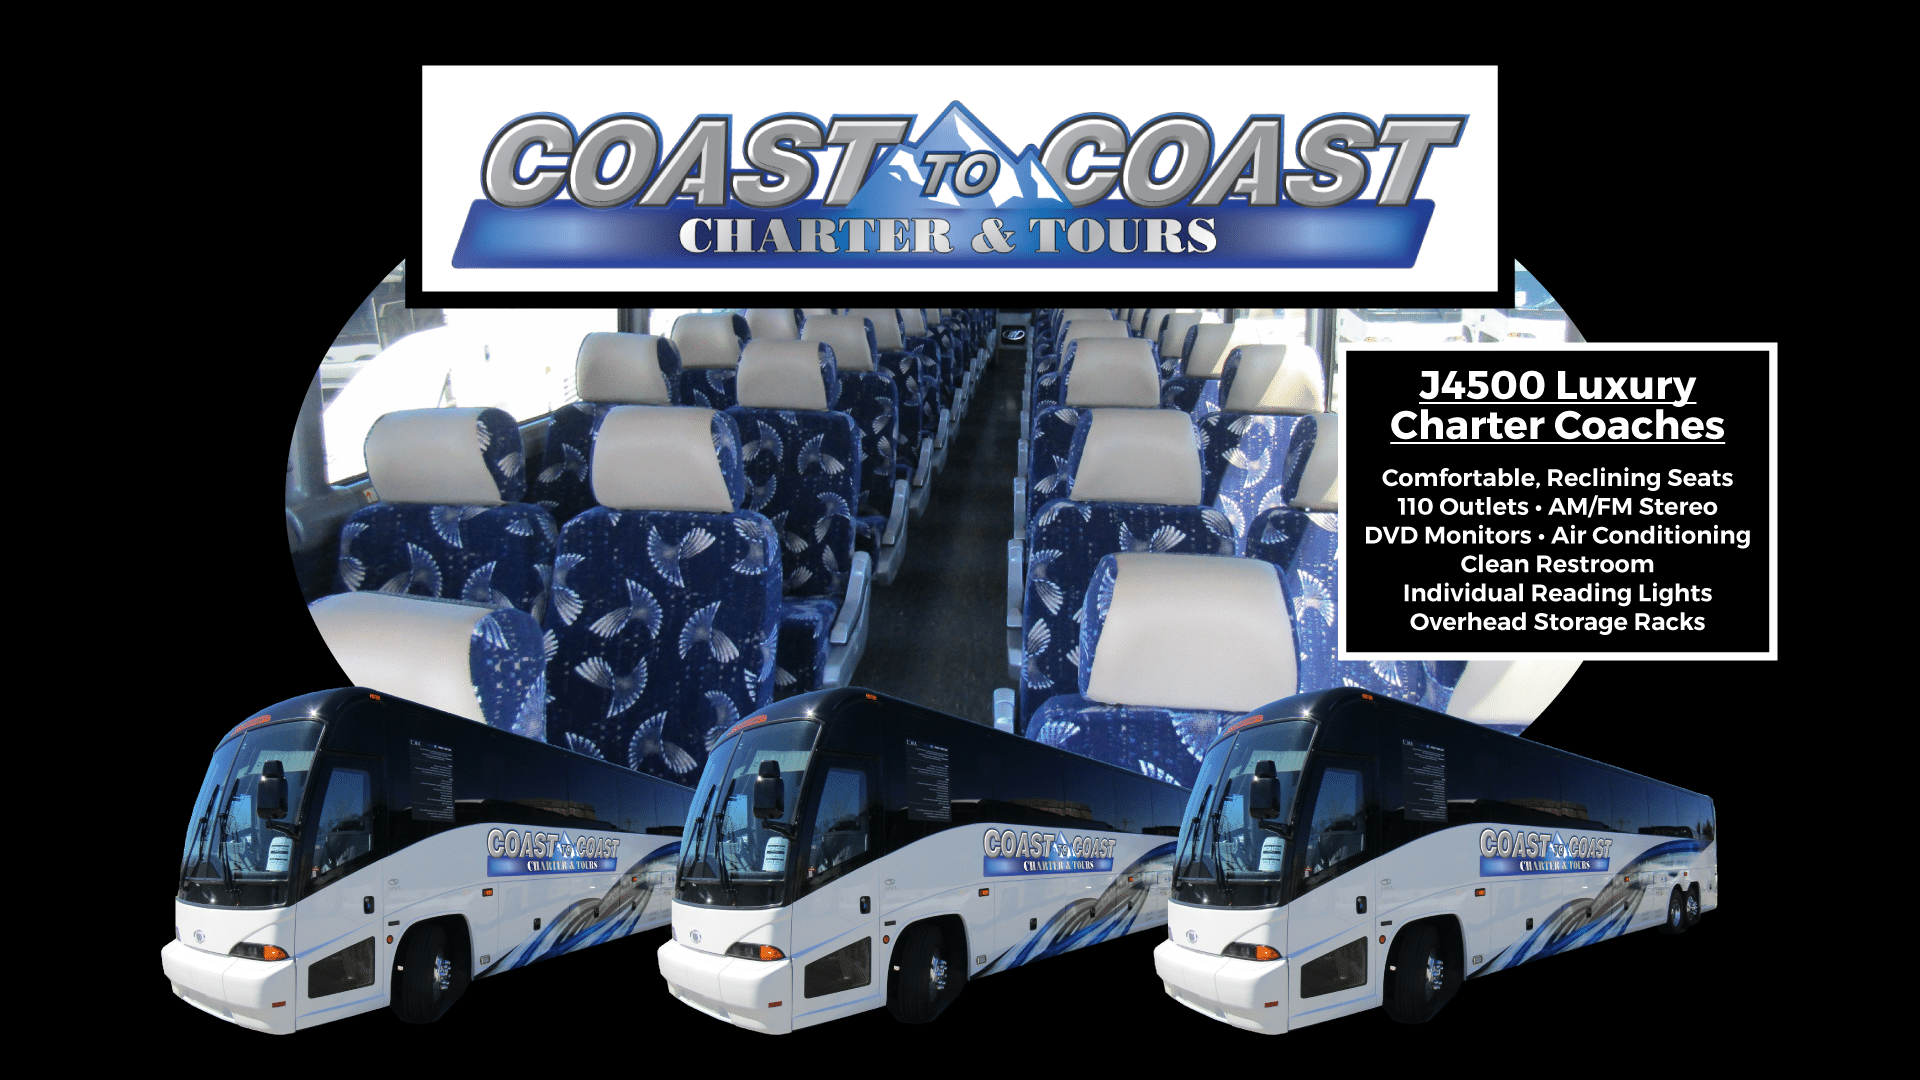 Our Motor Coach Rentals & Charters